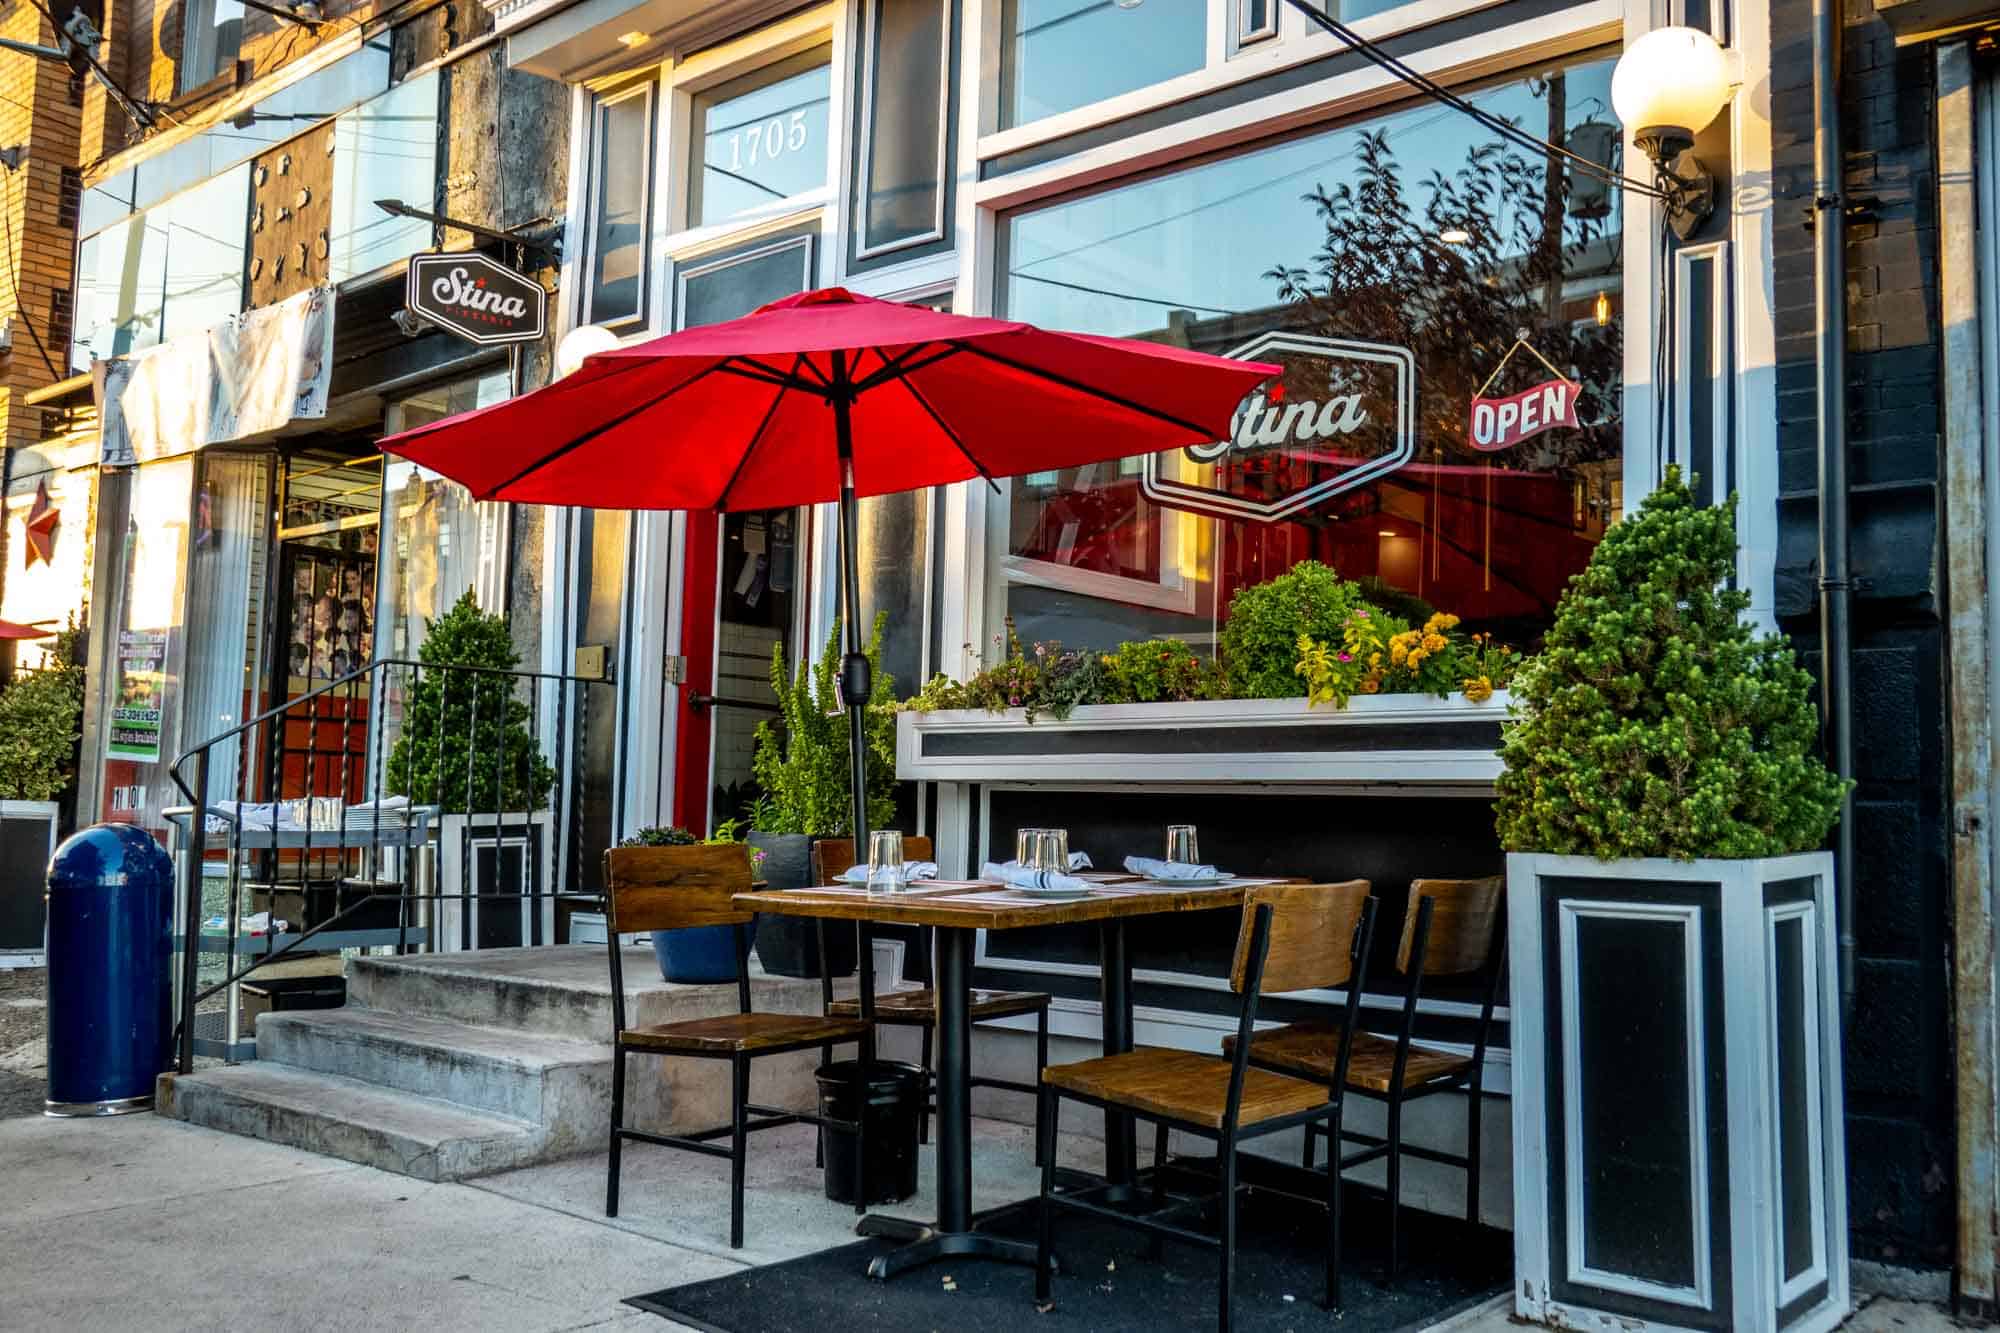 Outdoor table with umbrella at pizzeria Stina in South Philly